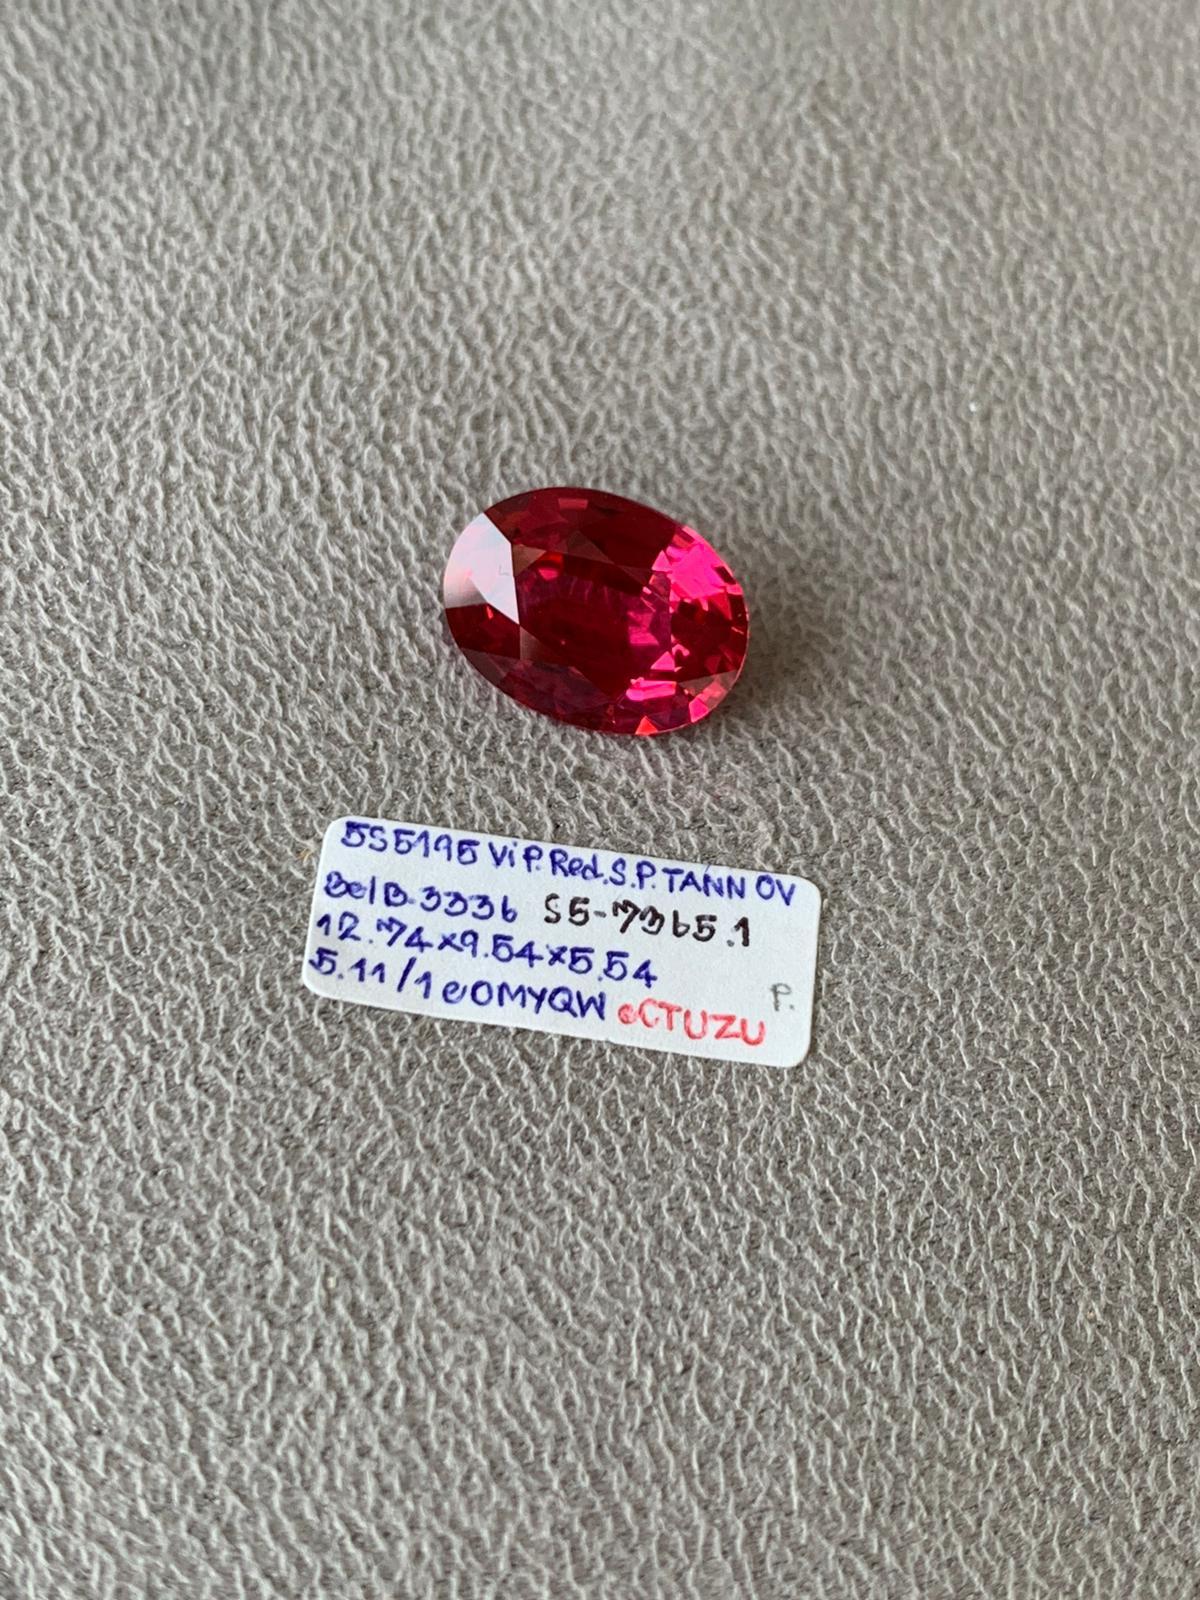 This Oval cut pinkish red spinel is 5.115cts. Completely eye and loupe clean this spinel shows off its natural sparkling color and has not been heat treated. Coming from the famous Mahenge area of Tanzania. Spinels of this quality and color are